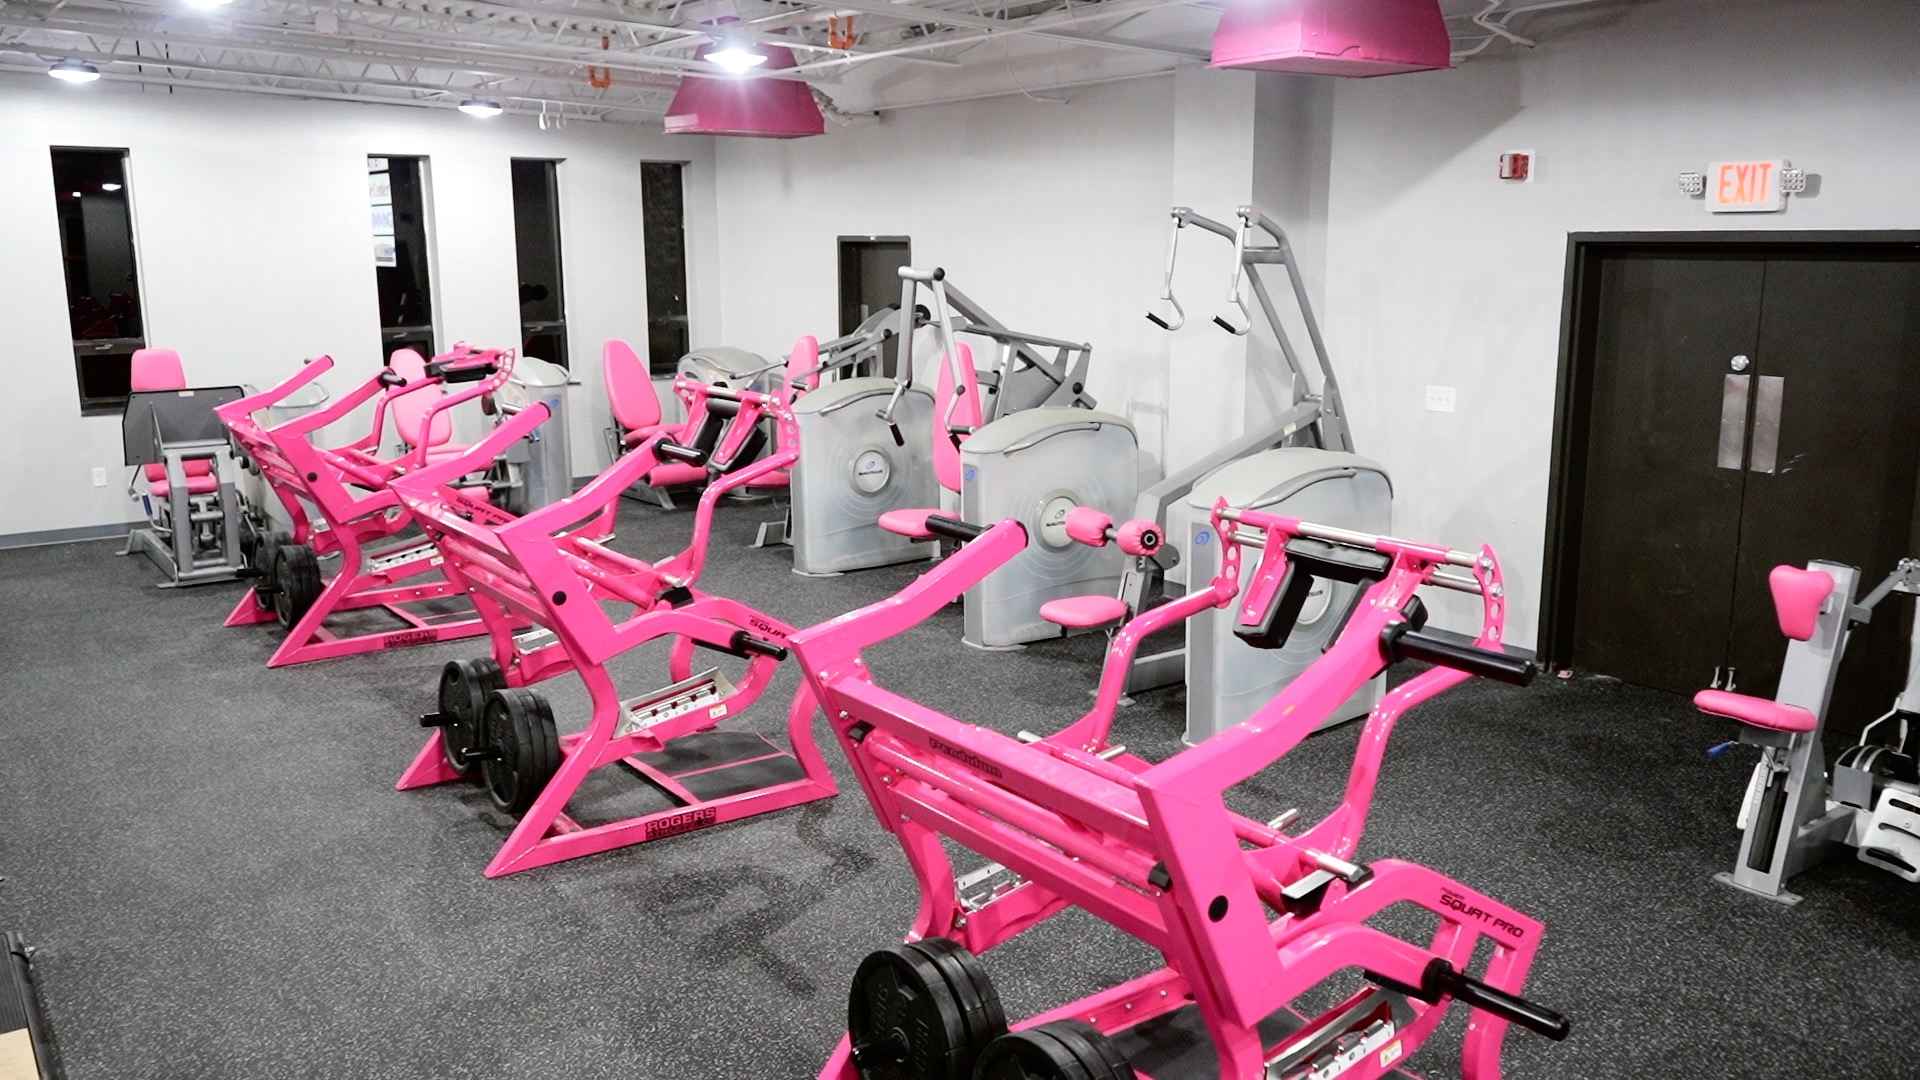 BAY AREA Womens only pink gym 💕Fairfield Ca 📍 Offering classes , per